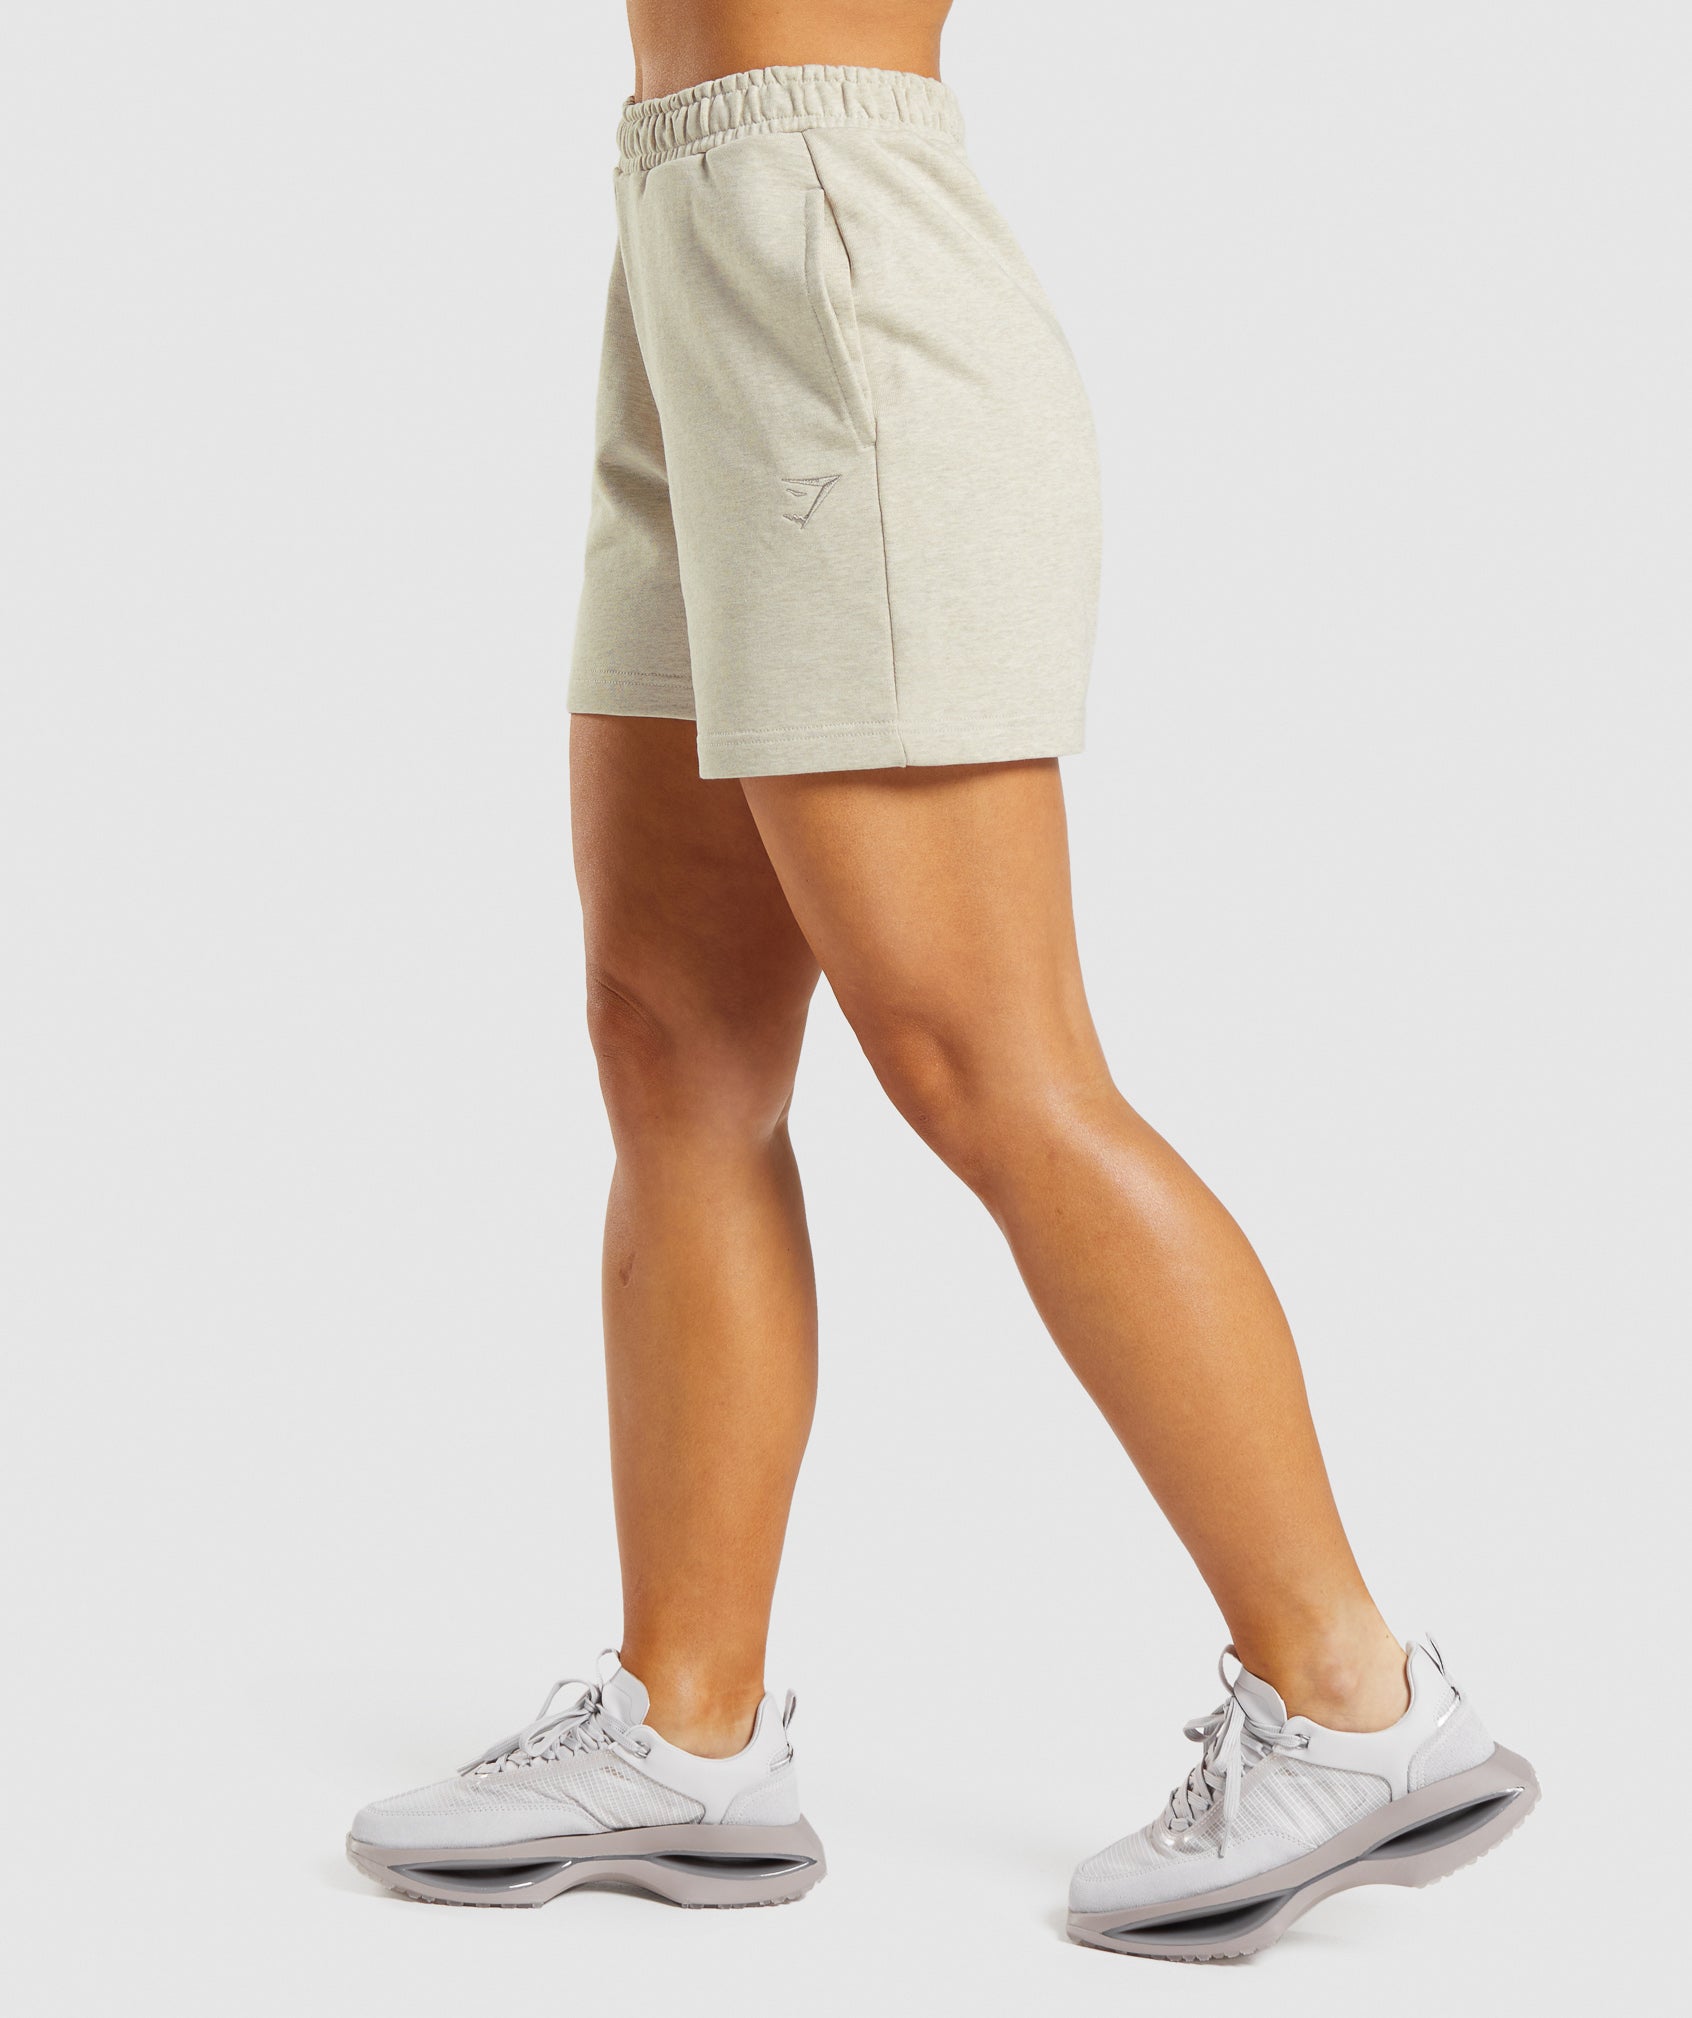 Rest Day Sweats Shorts in Sand Marl - view 4